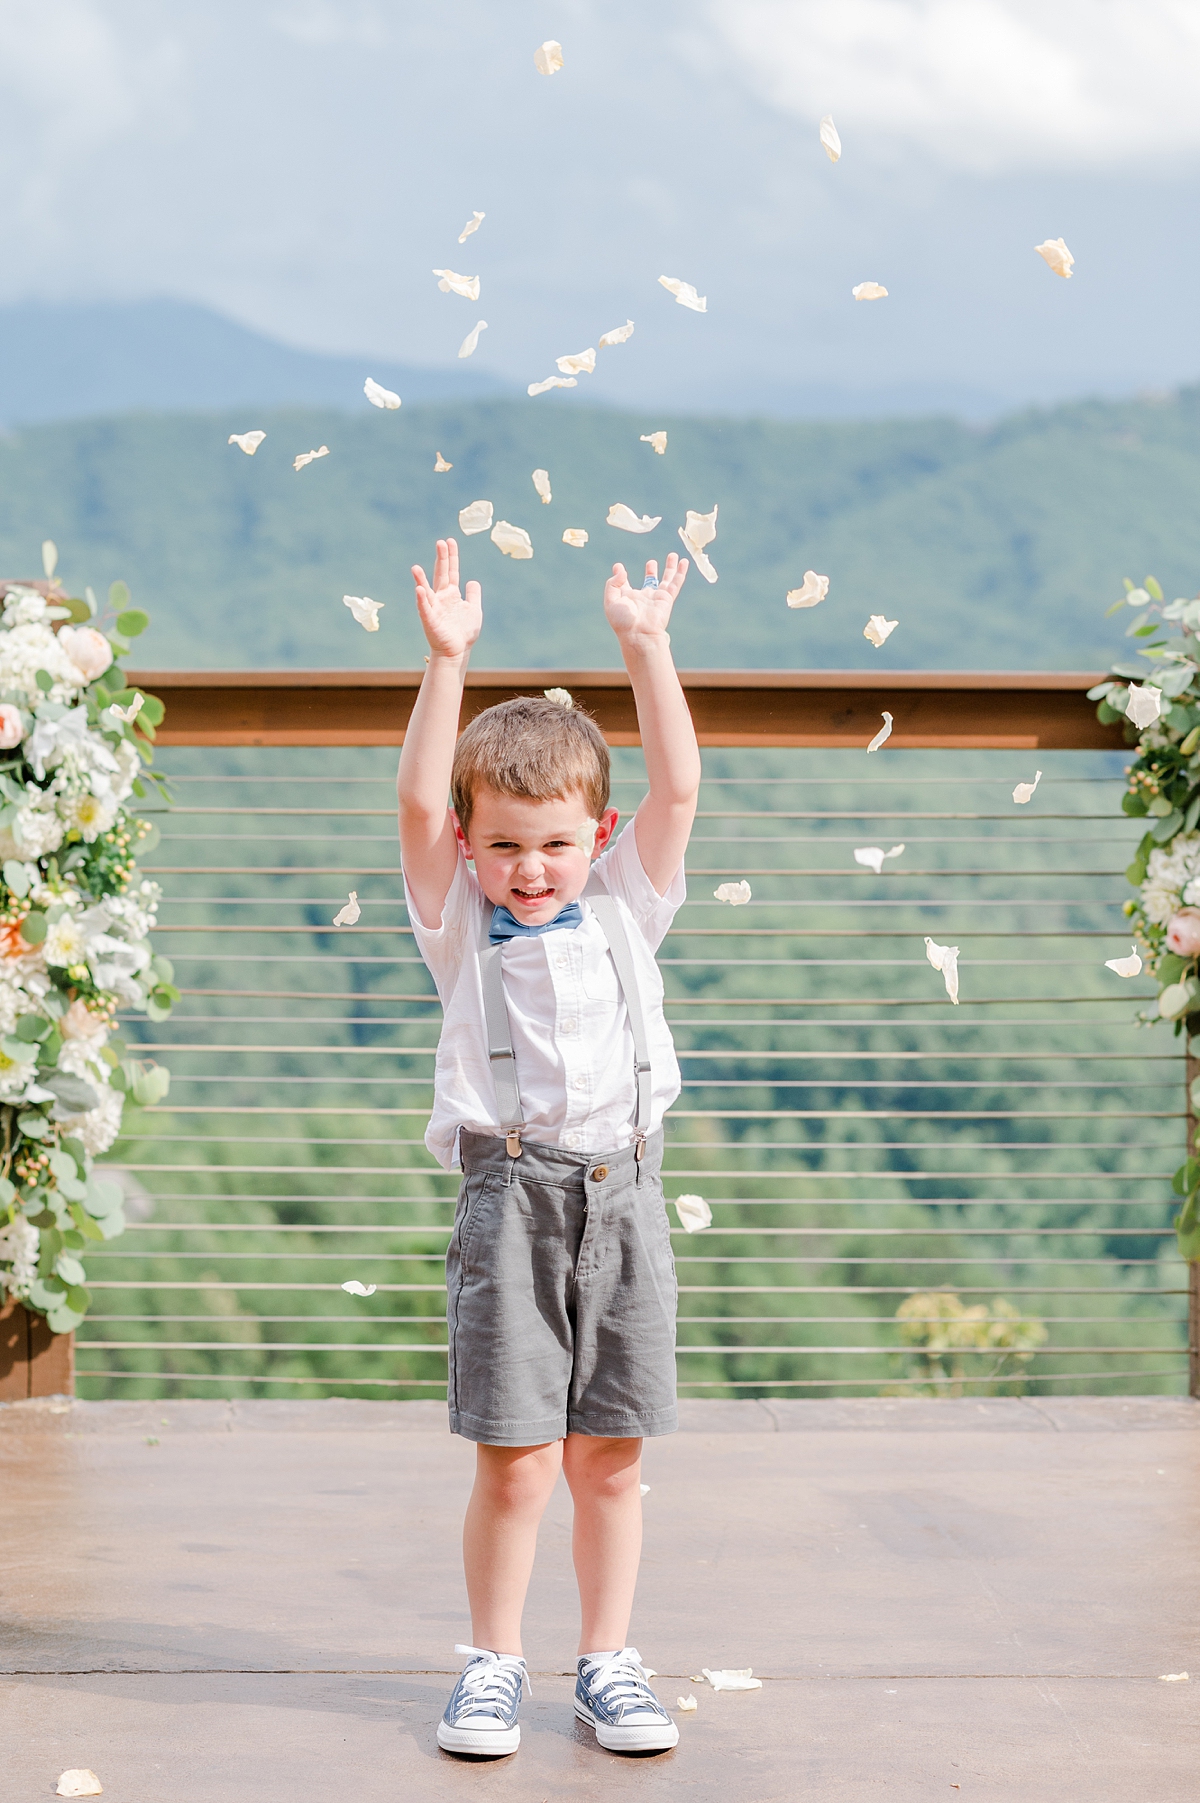 Flower Boy with Suspenders and Bow Tie at Summer Magnolia Venue Smoky Mountain Wedding. Virginia Wedding Photographer Kailey Brianne Photography. 